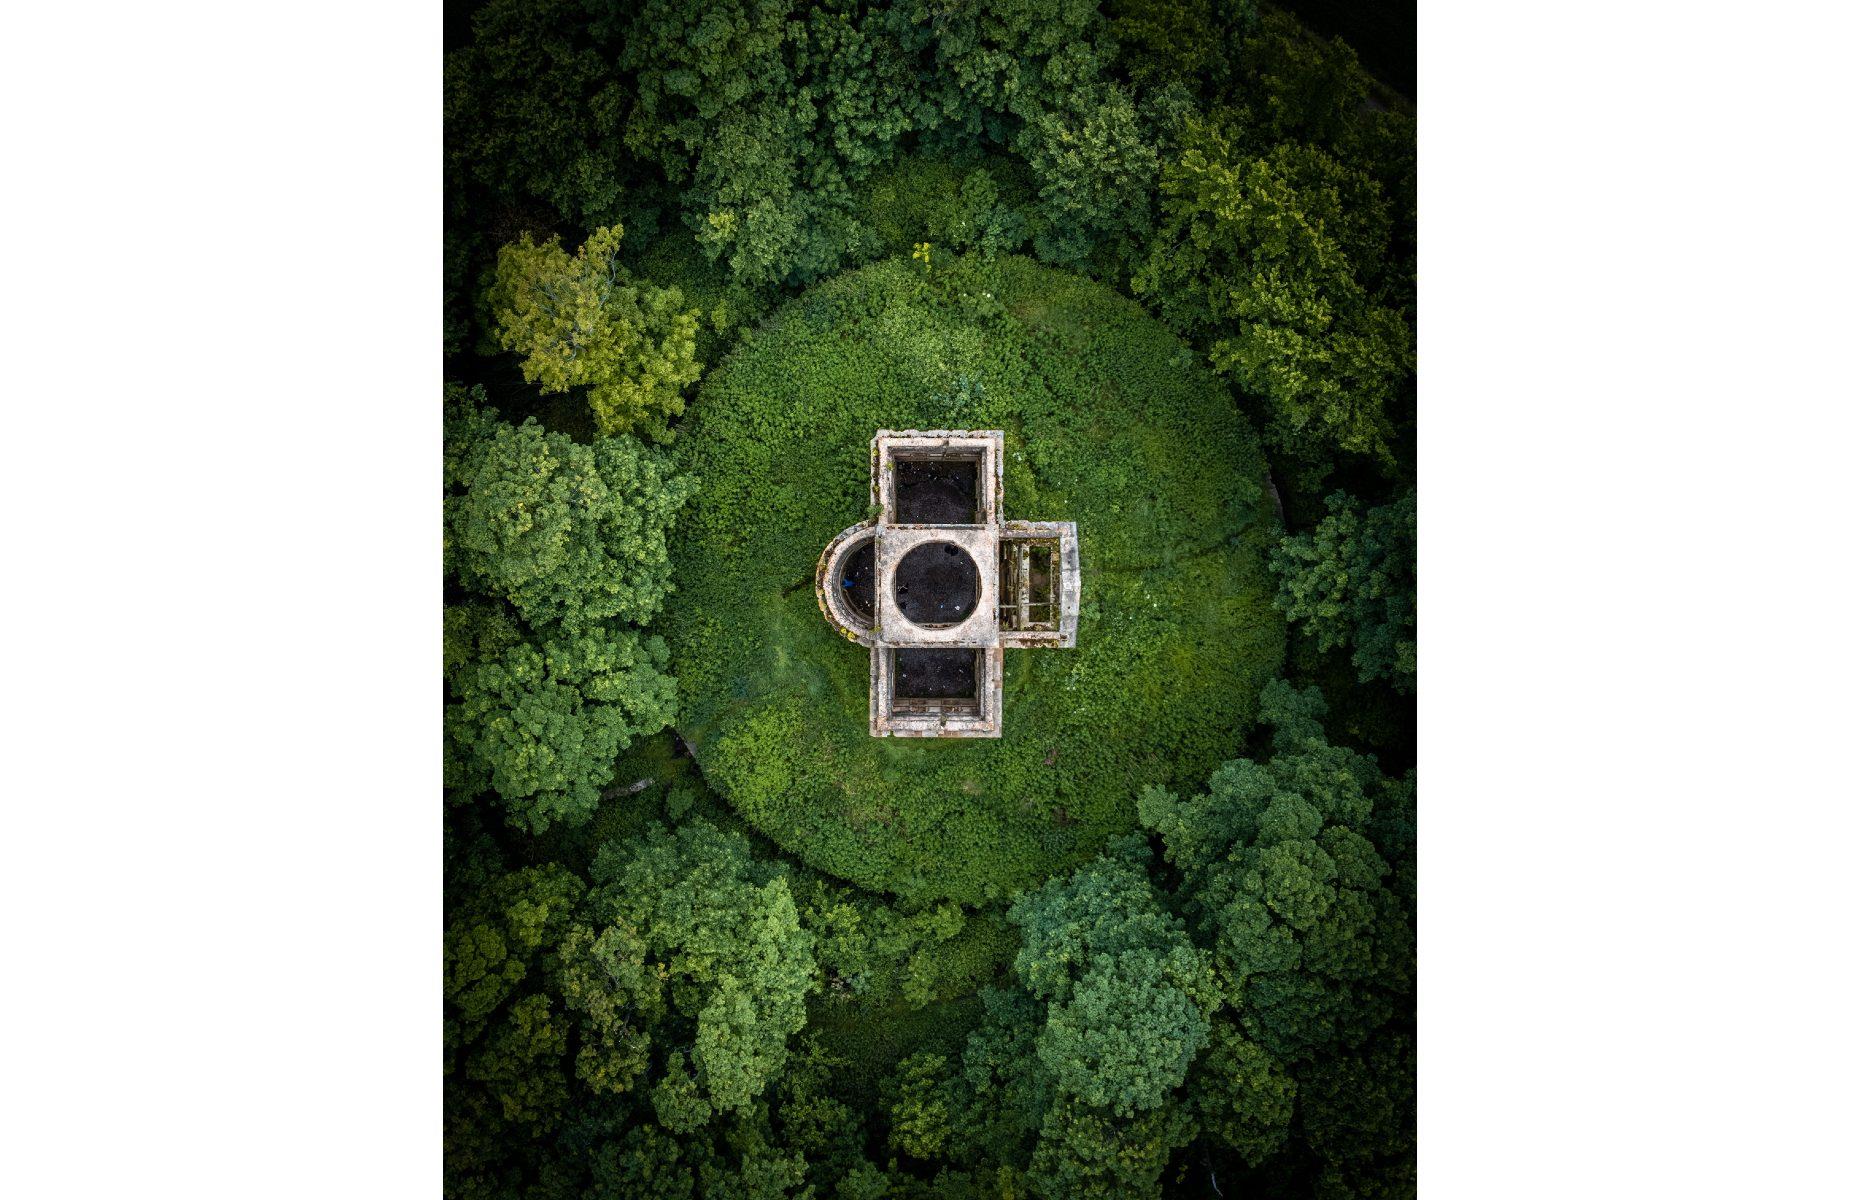 Drone technology has allowed us to see historic places in incredible new ways, as in the case of this spectacular shot by Alan Blackie. It shows this Grade II-listed mausoleum, which was built in the 18th century and lies around a third of a mile (500m) from Seaton Delaval Hall, a stately home which is owned by the National Trust.